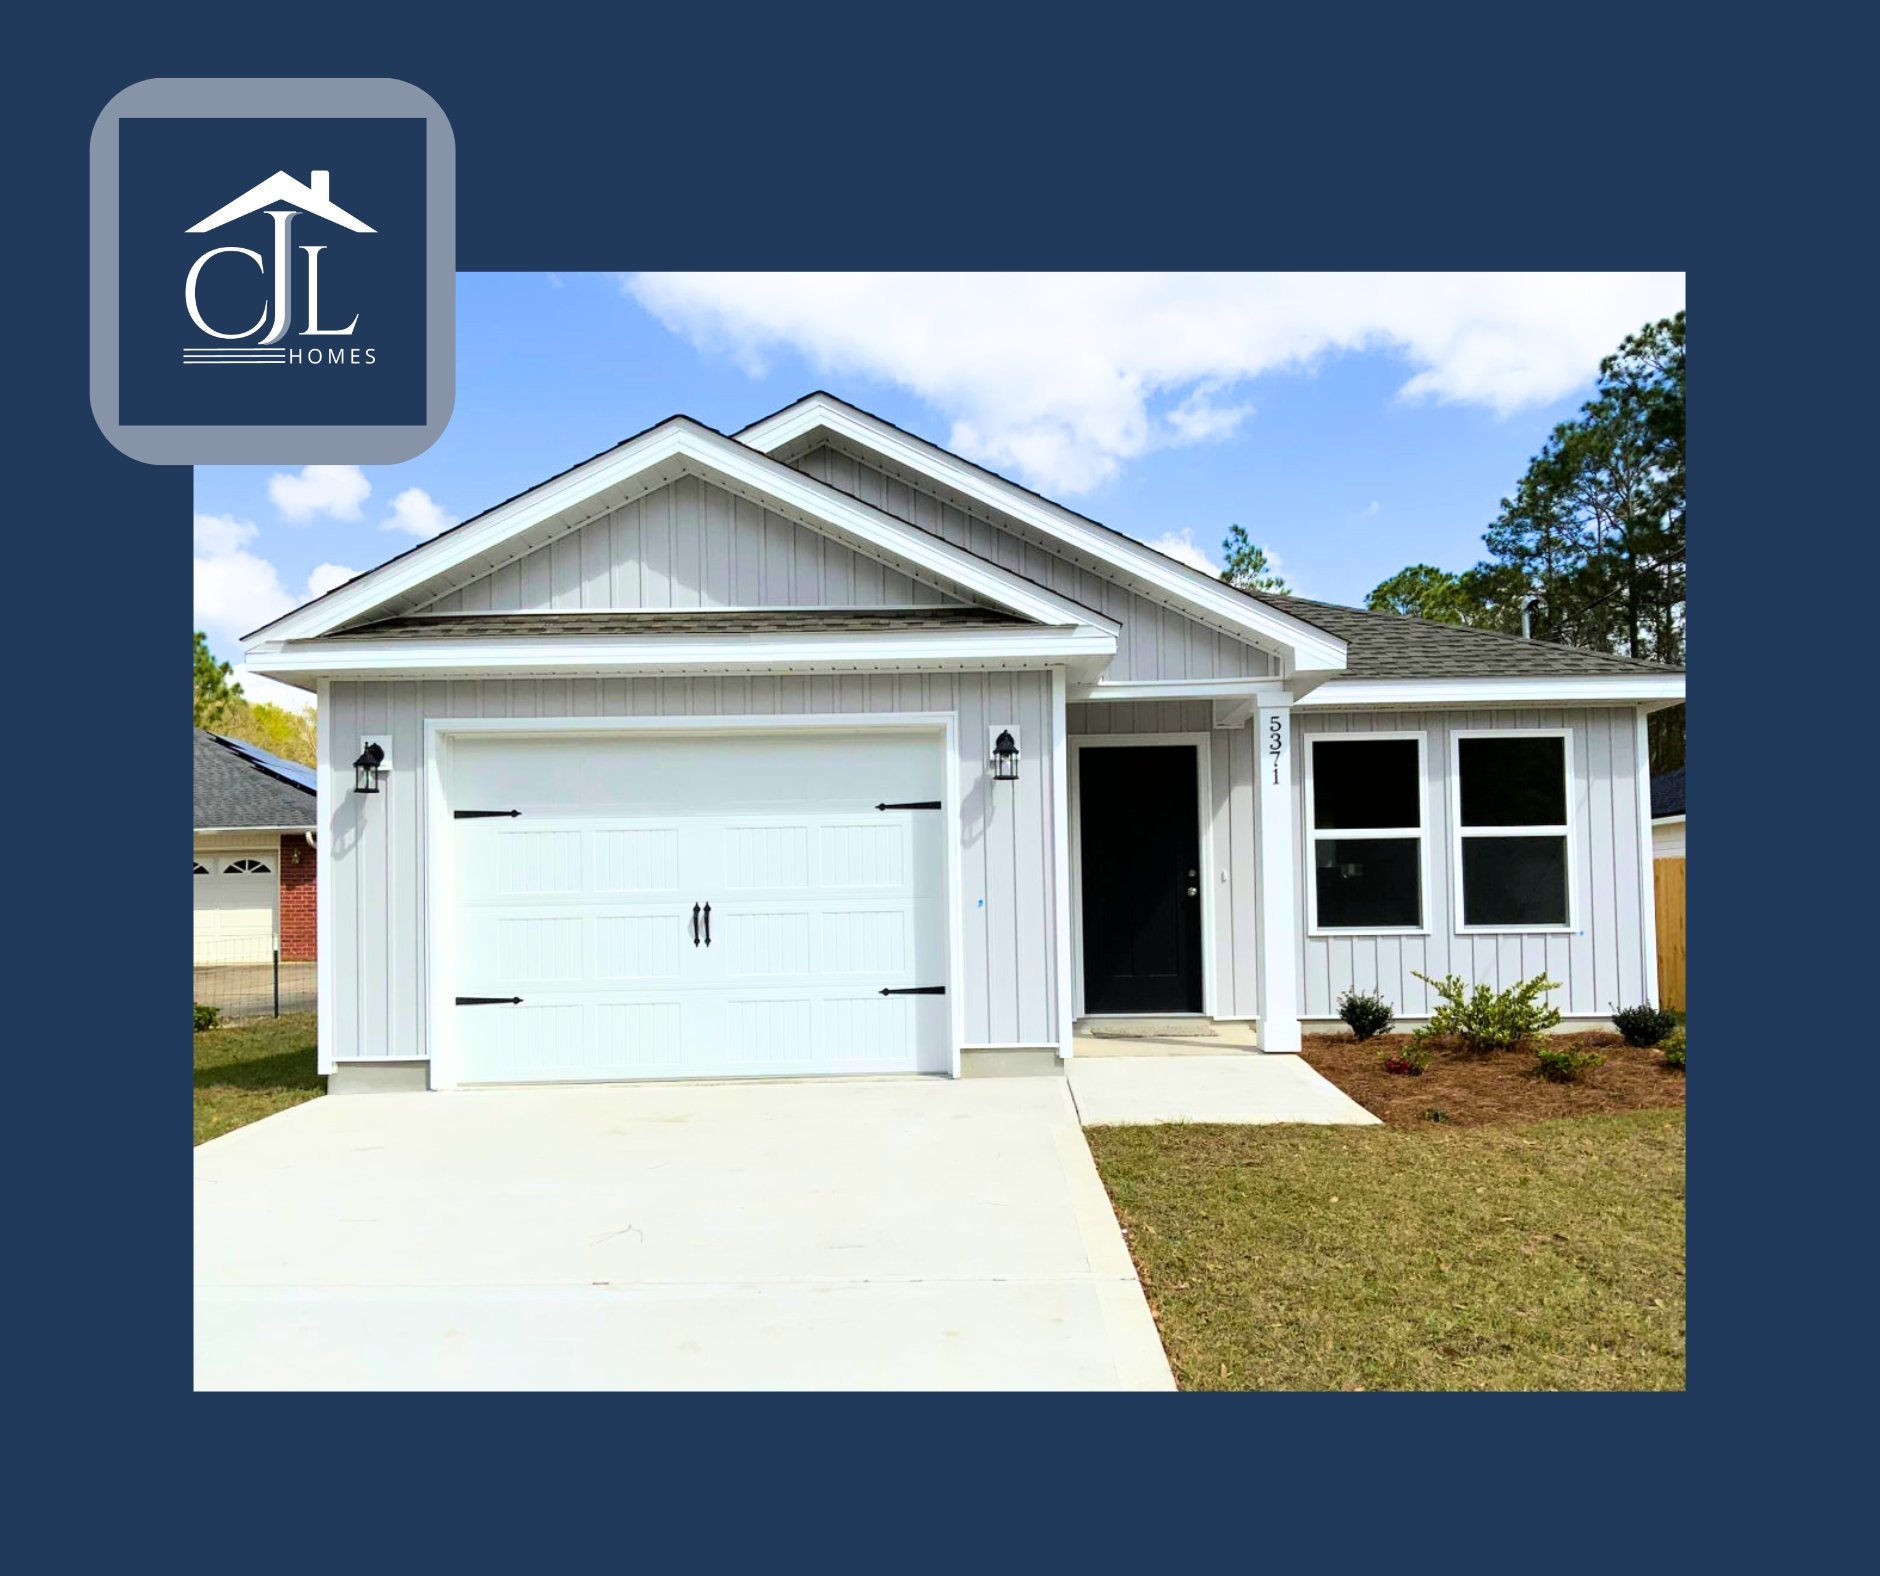 🏡 **Just Listed!** 🏡

Welcome to 3164 Chestnut Street, Crestview, FL 32539 - your future home sweet home!

🌟 Price: $249,000
🛏️ Bedrooms: 3
🛁 Baths: 2
🏡 Year Built: 2024

✨ Highlights:
- Craftsman Style Design
- Porches on front and back for re